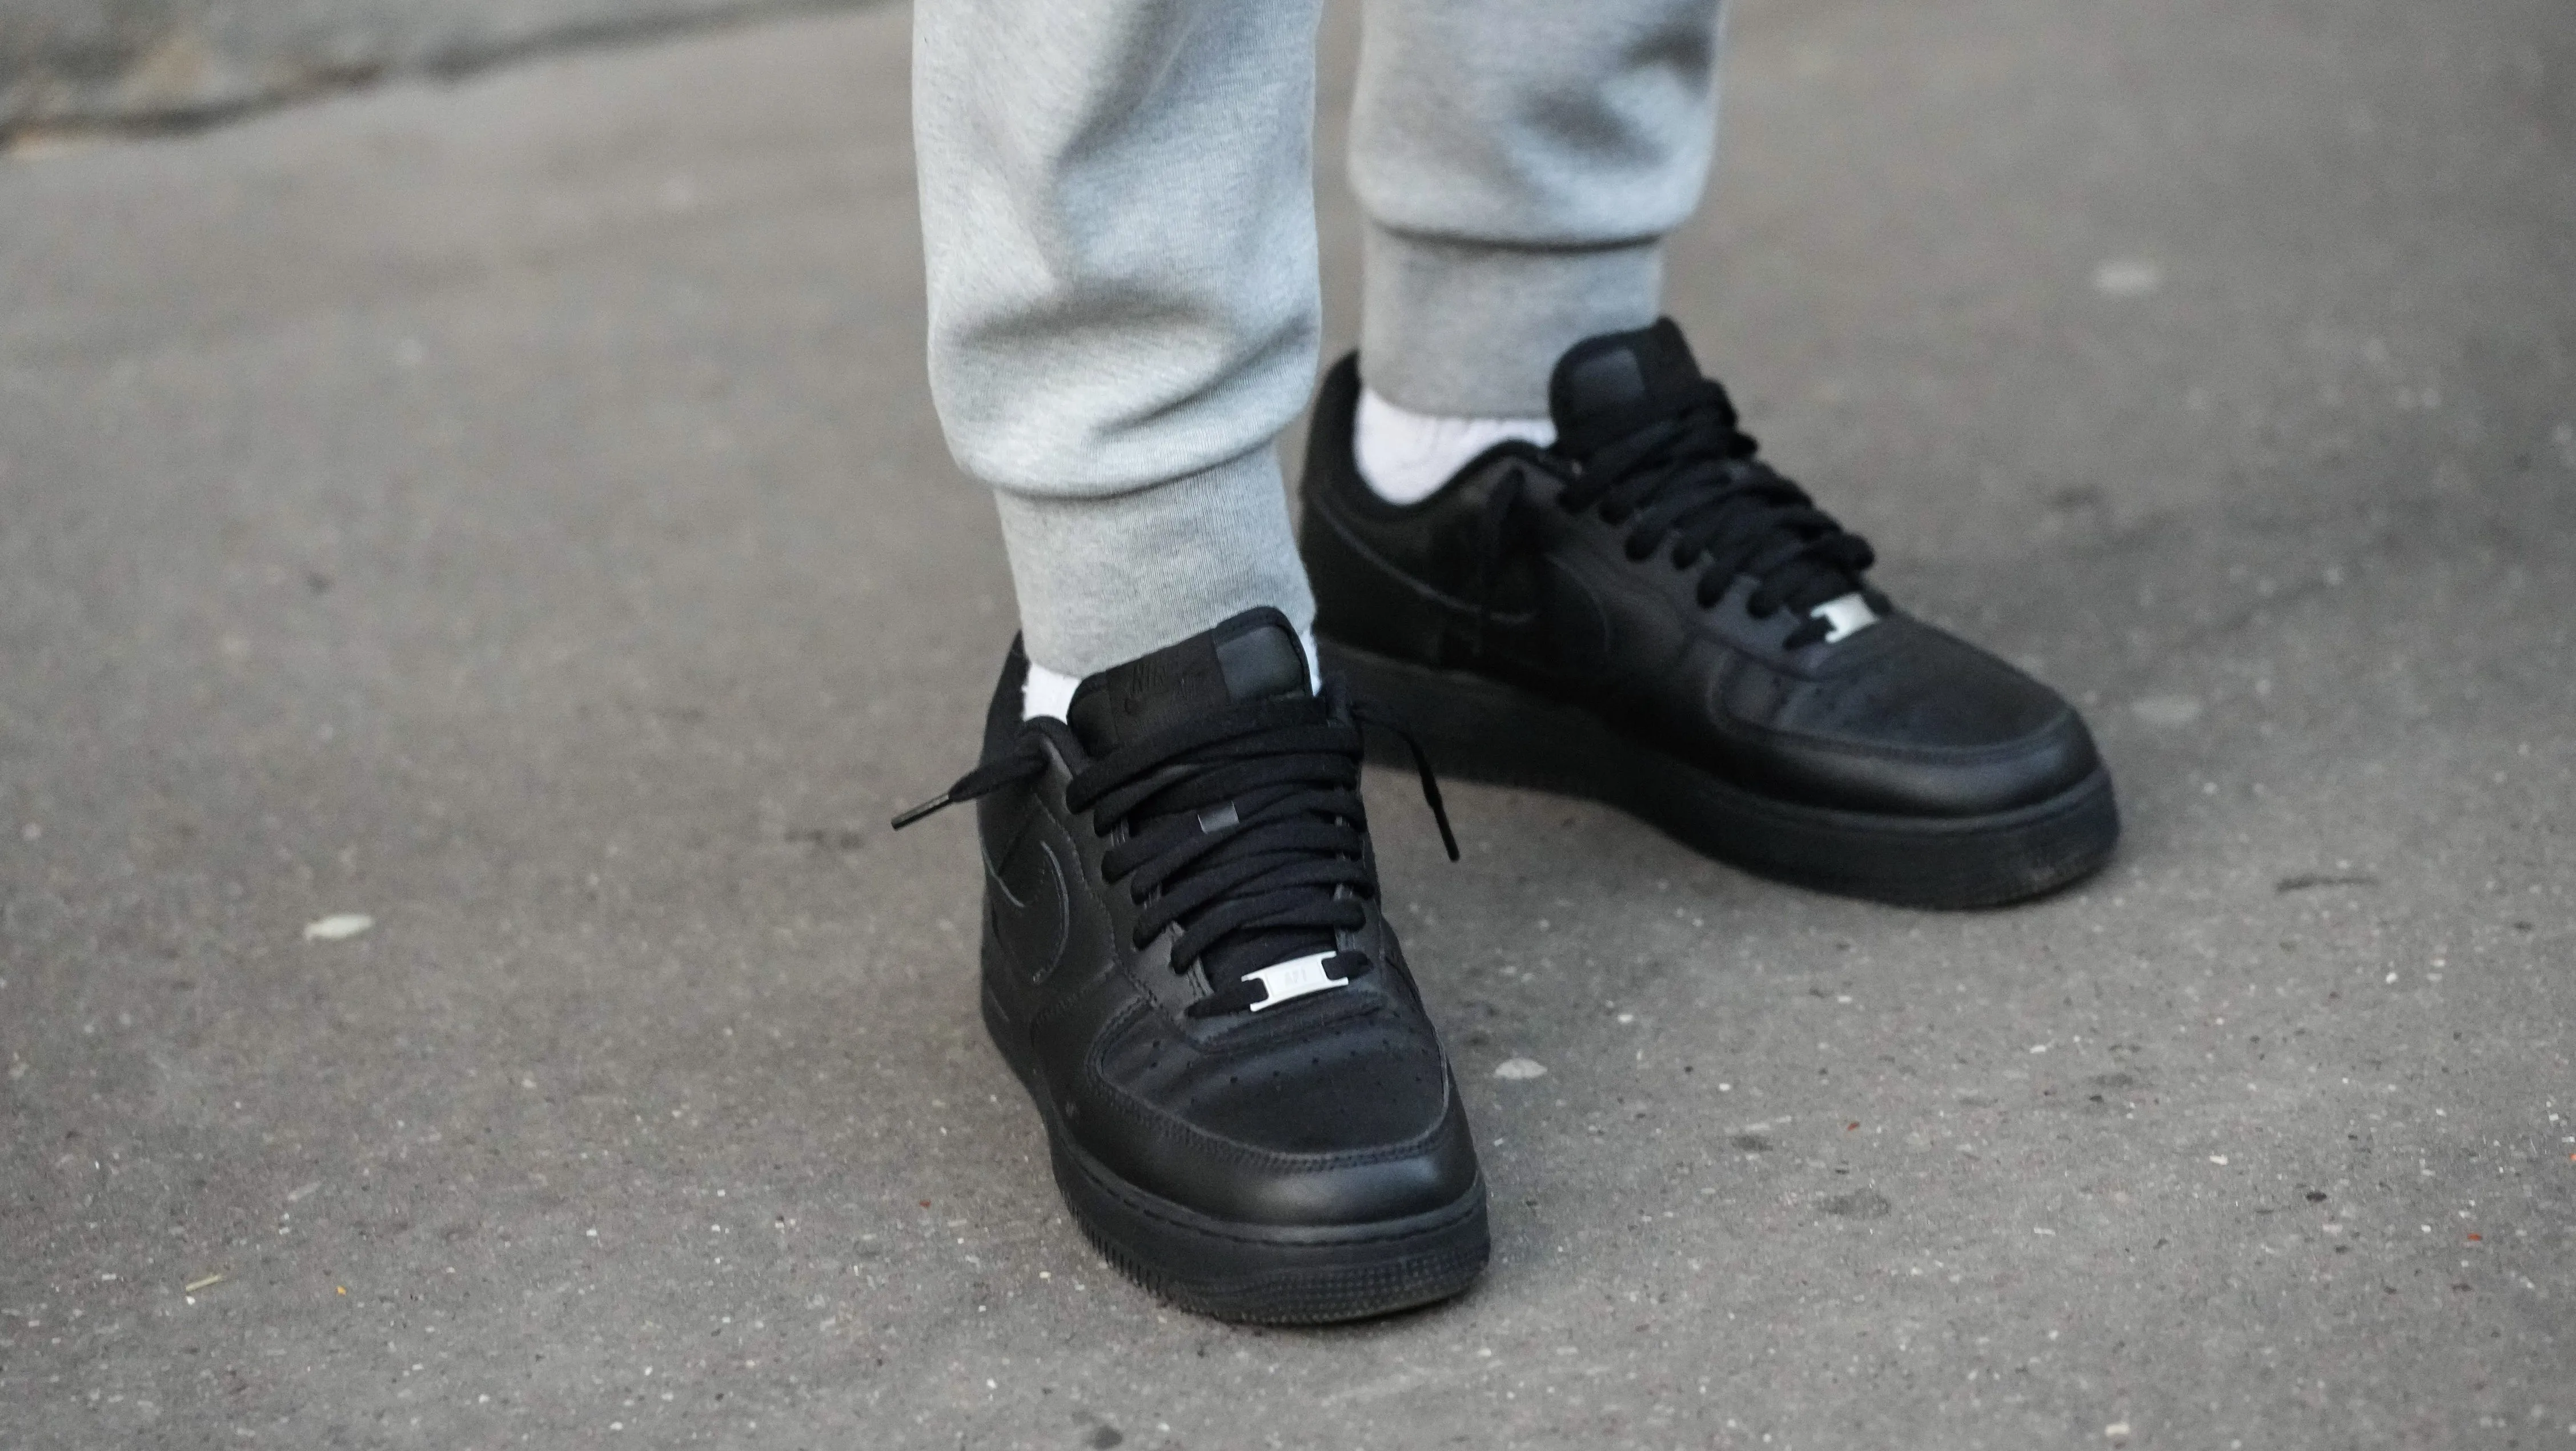 In defense of the triple-black Nike Air Force 1, a shoe whose reputation  could use some upliftment - TheGrio